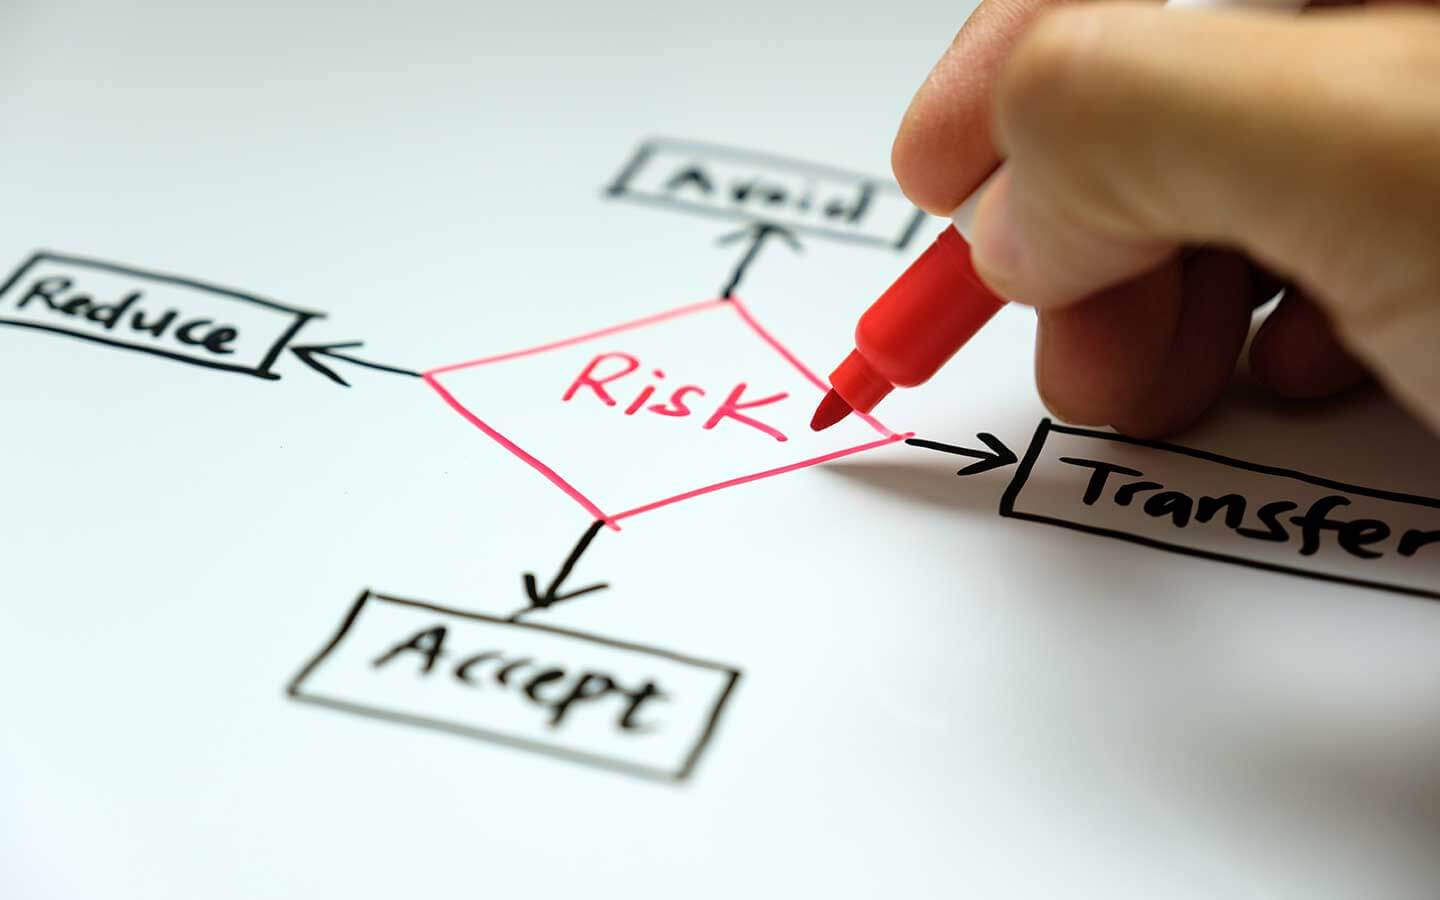 Mitigating Risks and Identifying Flaws